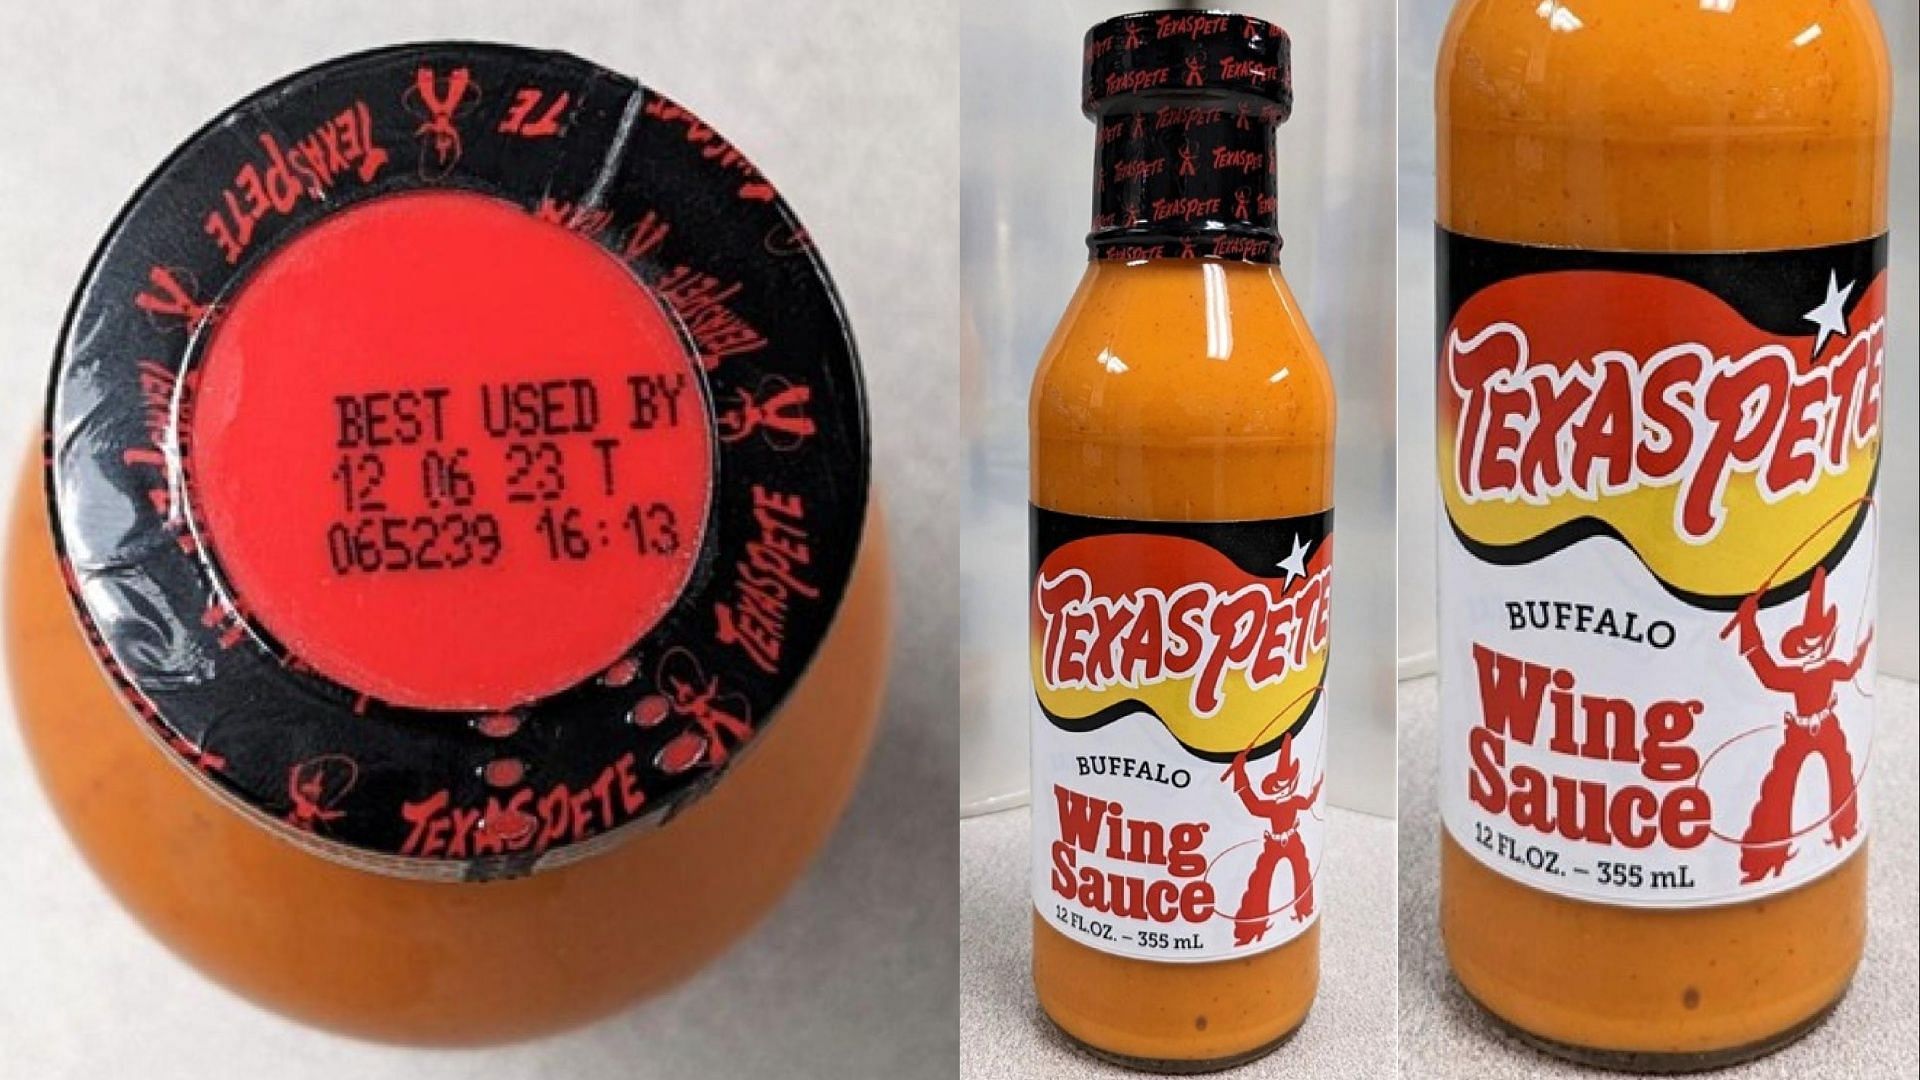 Texas Pete&reg; Extra Mild Wing Sauce containing soy may have been mistakenly packed in Texas Pete Buffalo Wing Sauce bottles causing an undeclared soy allergen problem (Image via FDA)